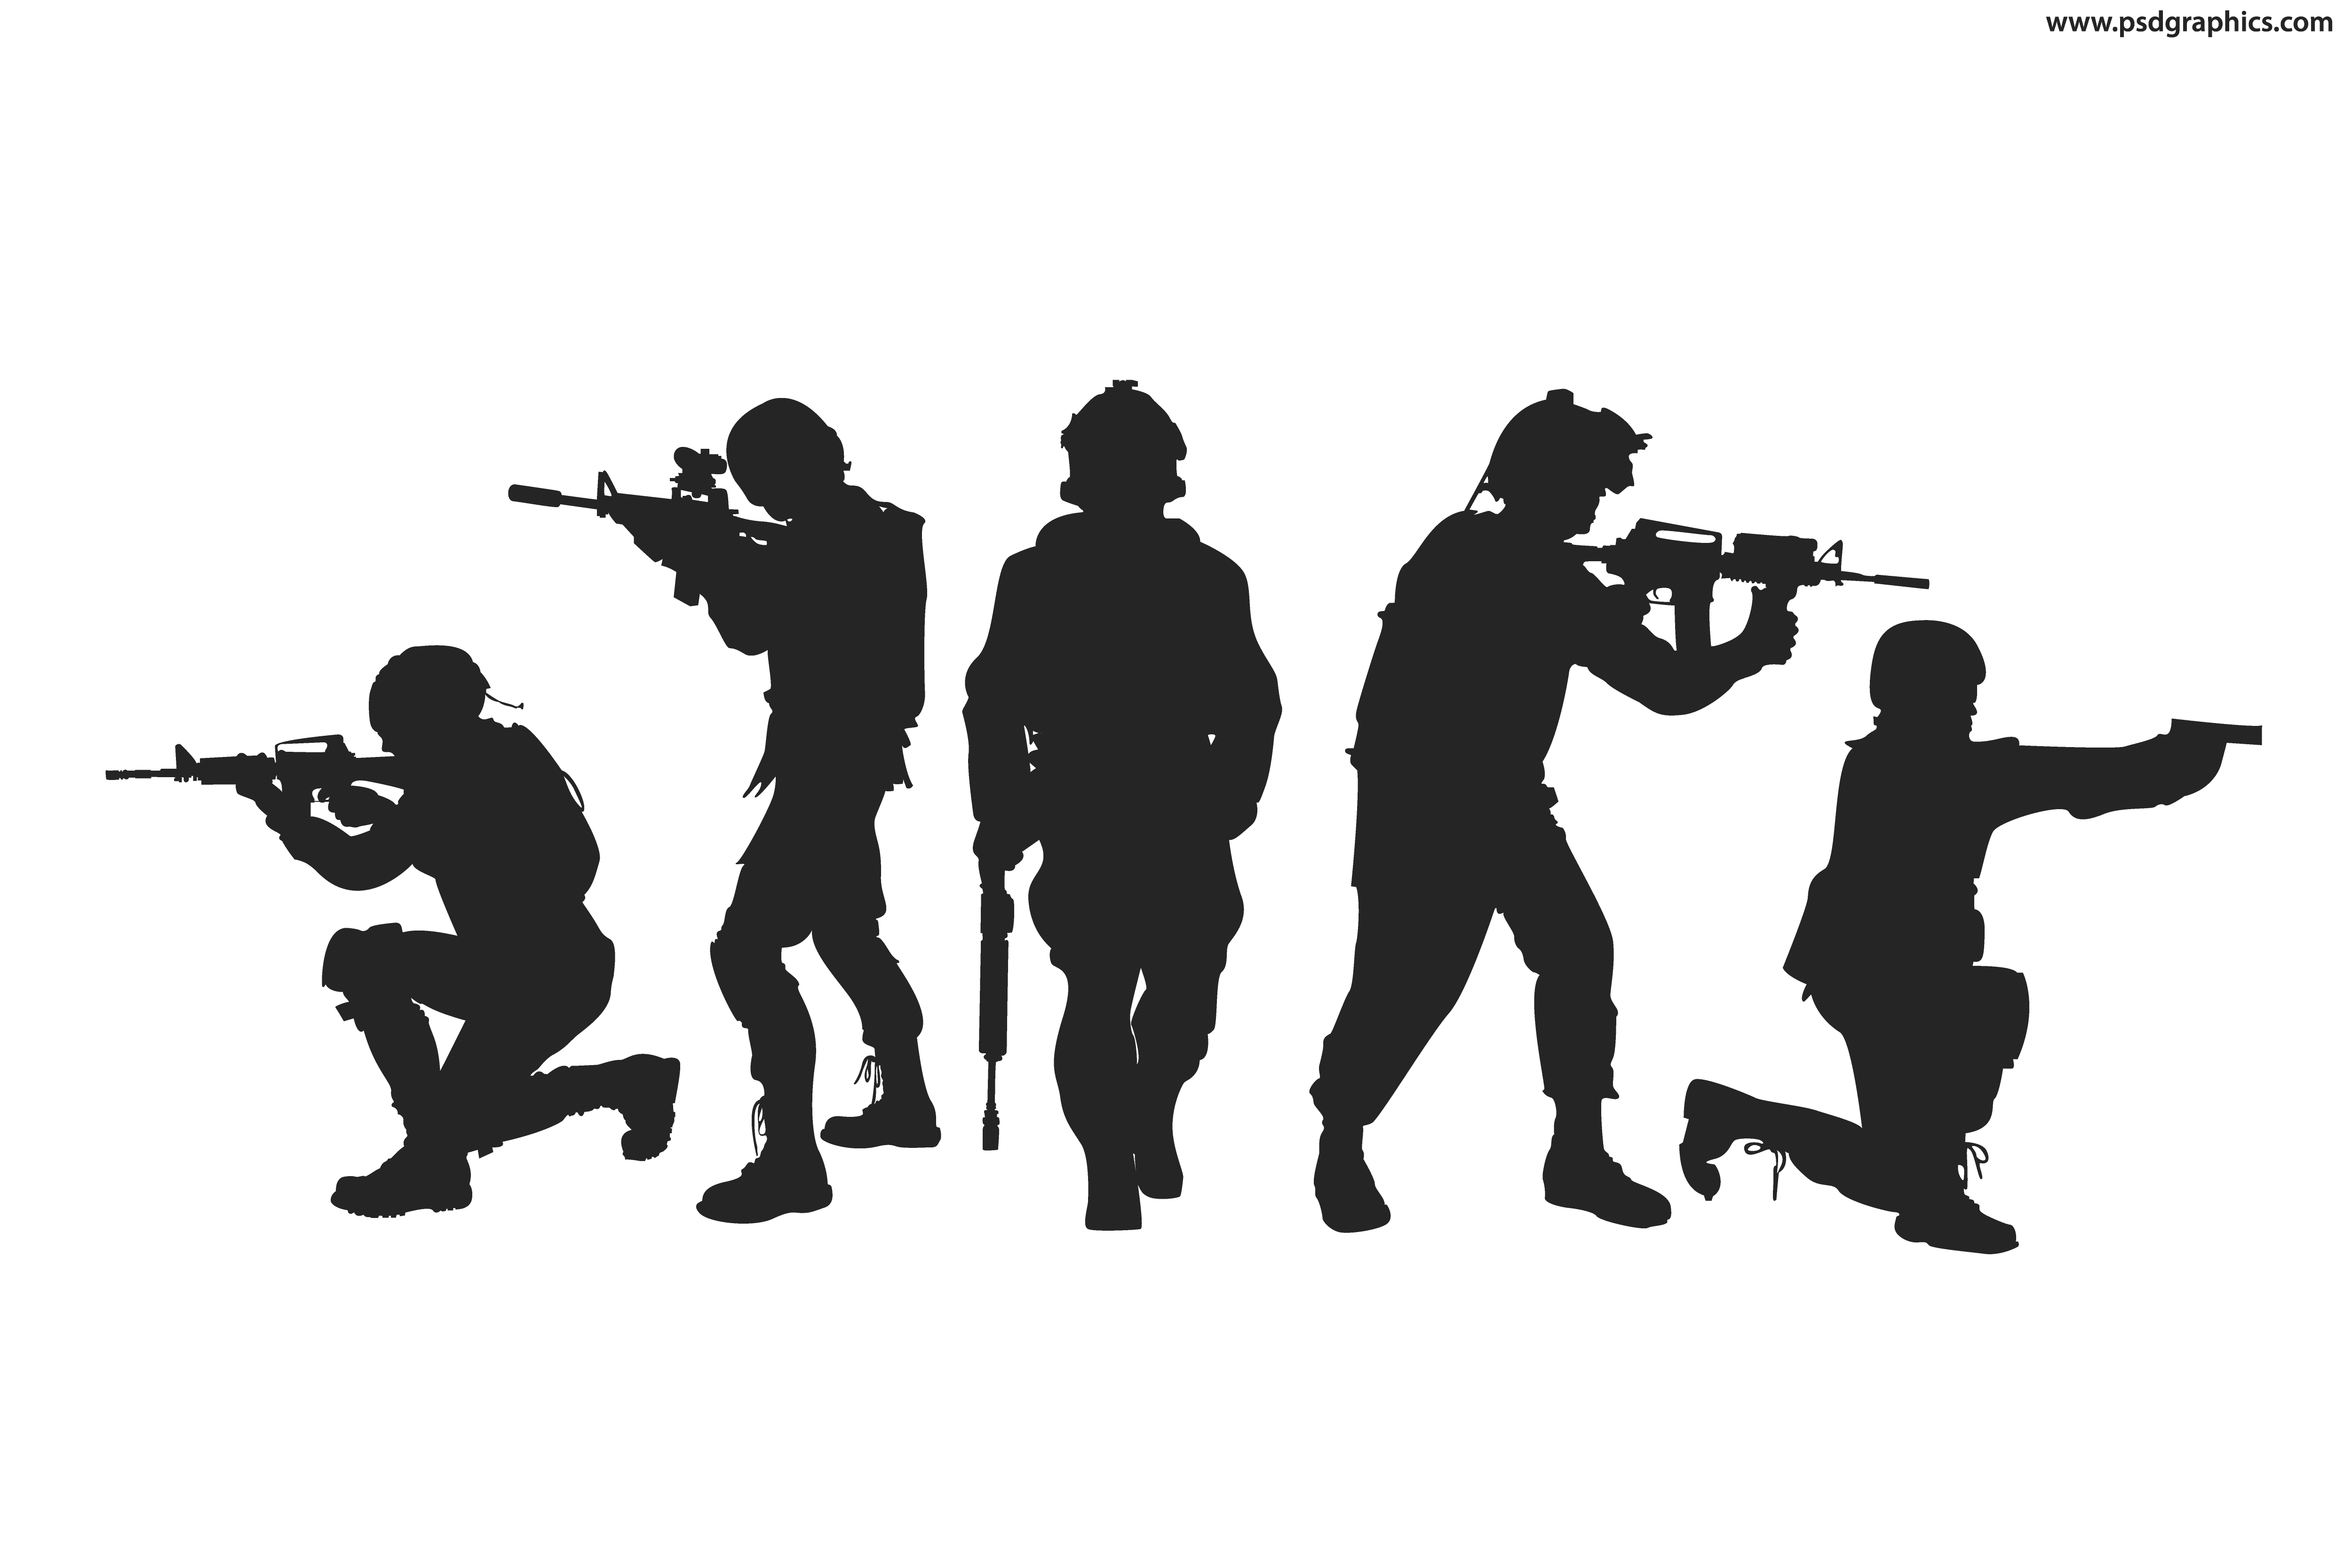 Soldiers clipart army soldier. Silhouette military png download